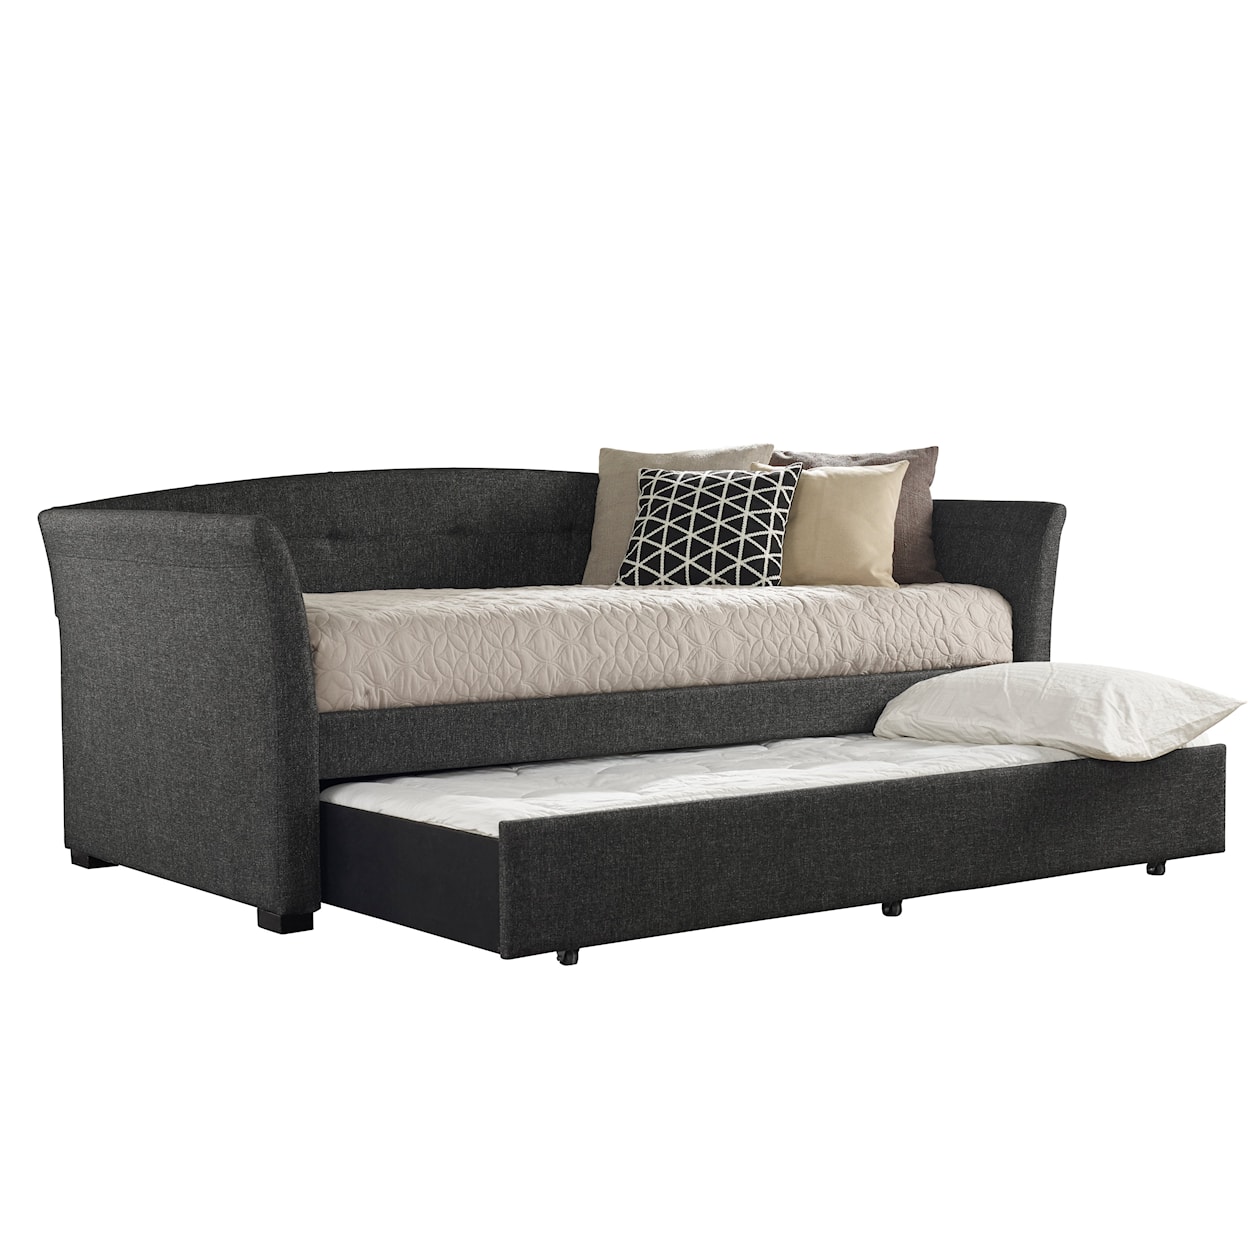 Hillsdale Morgan 2411dbt Morgan Upholstered Twin Daybed With Trundle Crowley Furniture 